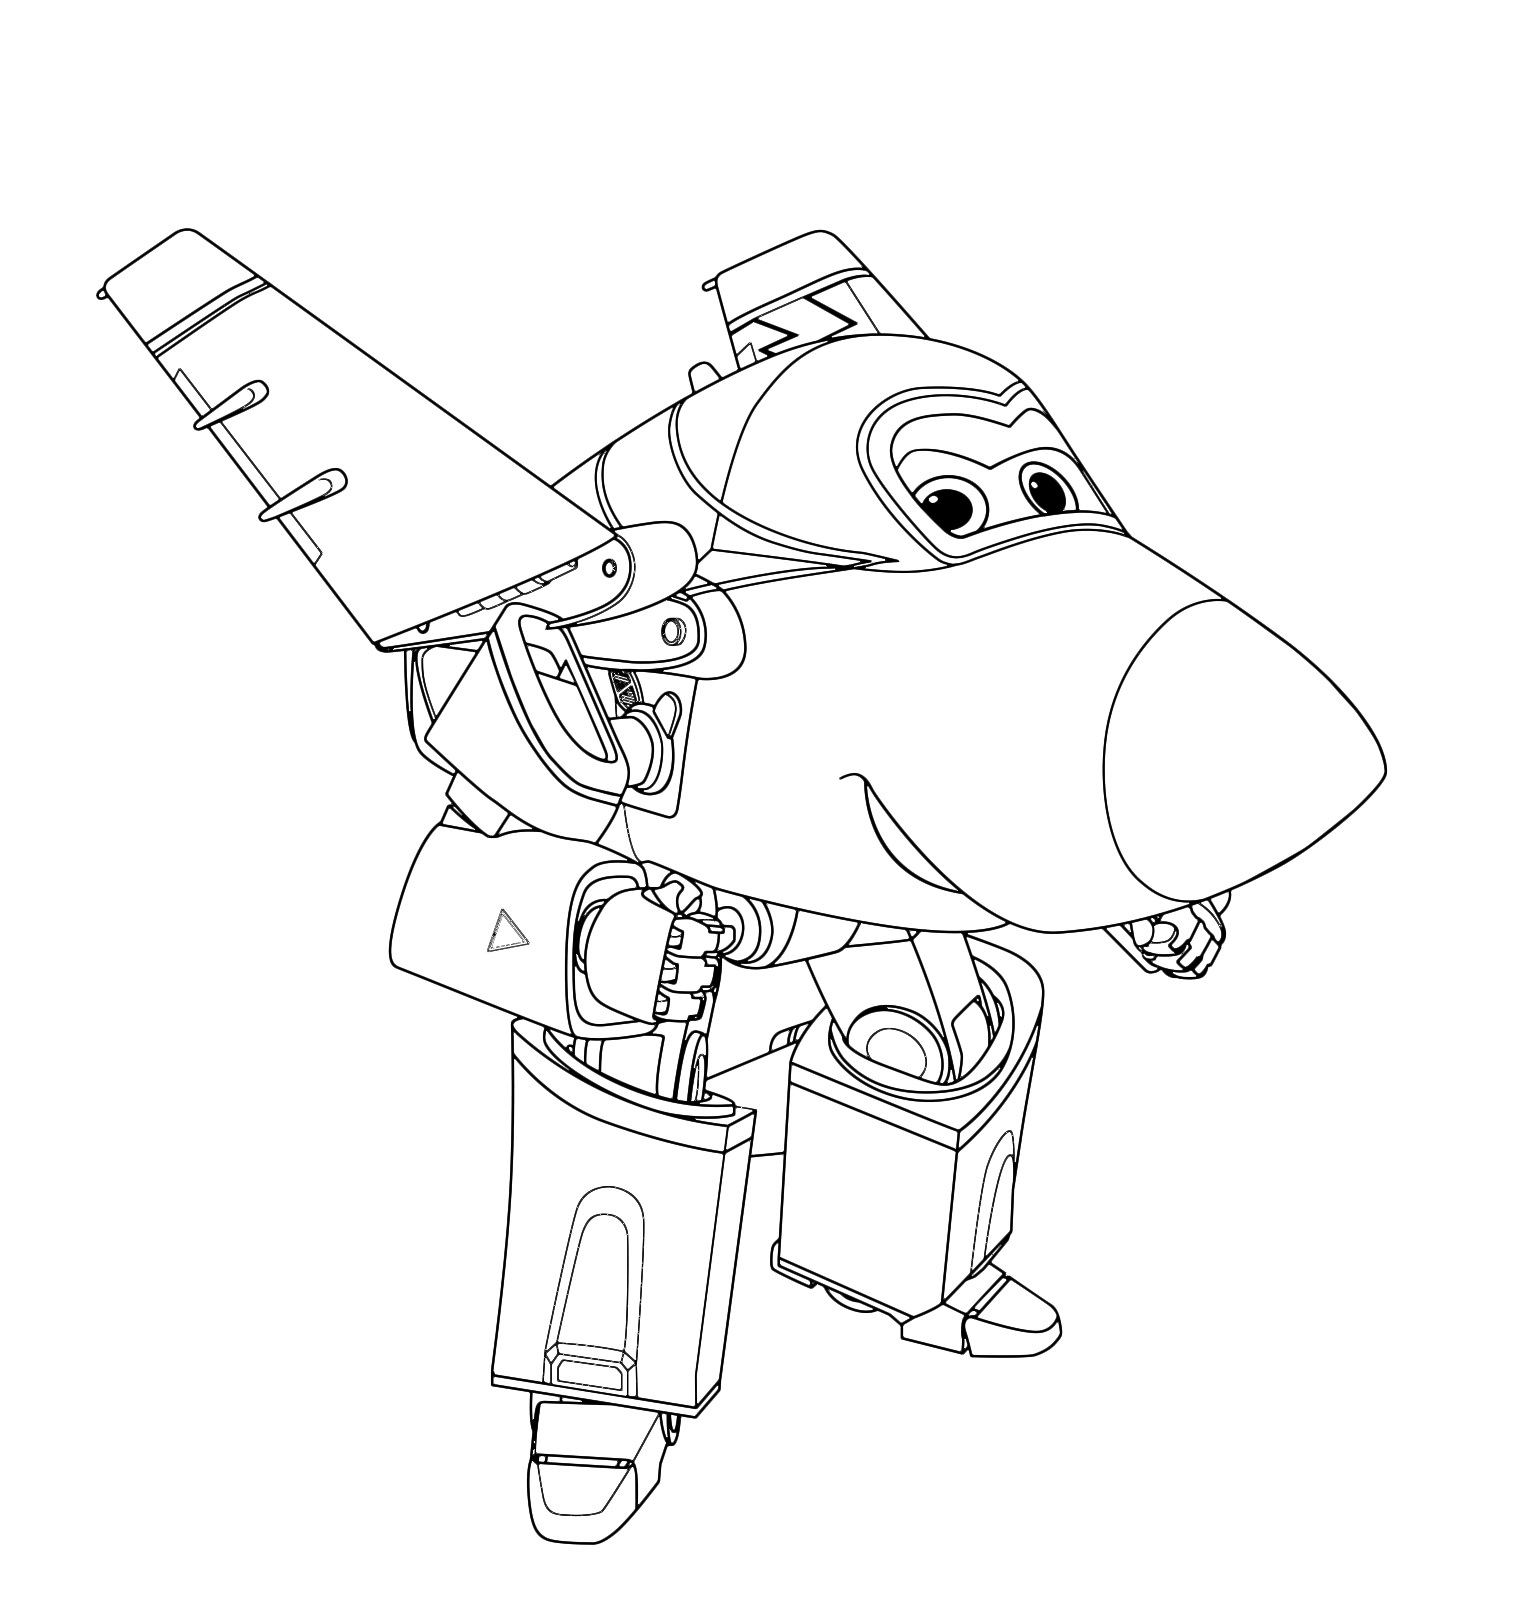 Super Wings - Jerome is ready for a stunt